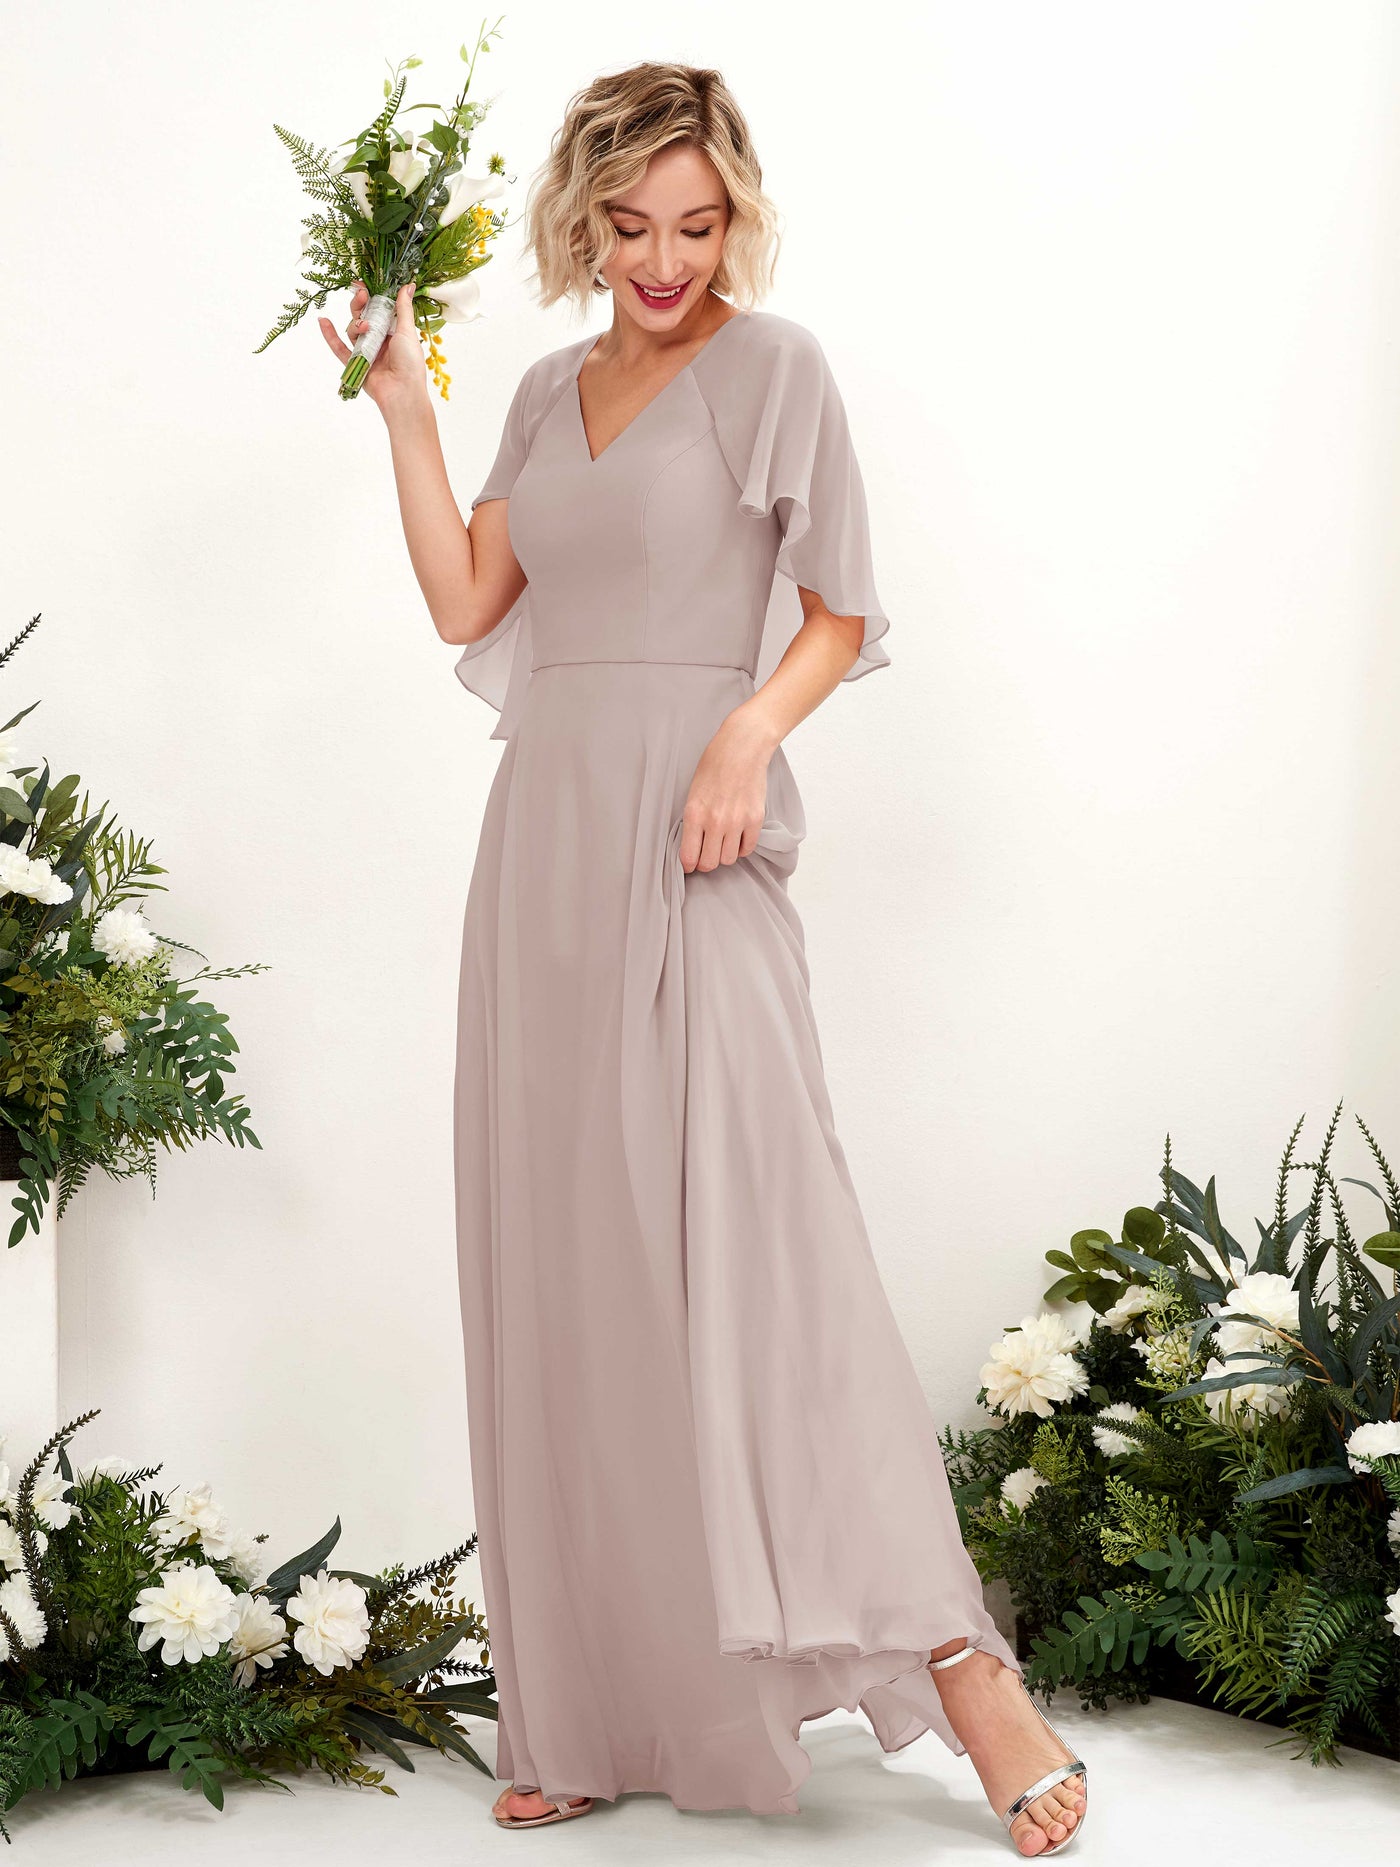 Taupe Bridesmaid Dresses Bridesmaid Dress A-line Chiffon V-neck Full Length Short Sleeves Wedding Party Dress (81224424)#color_taupe